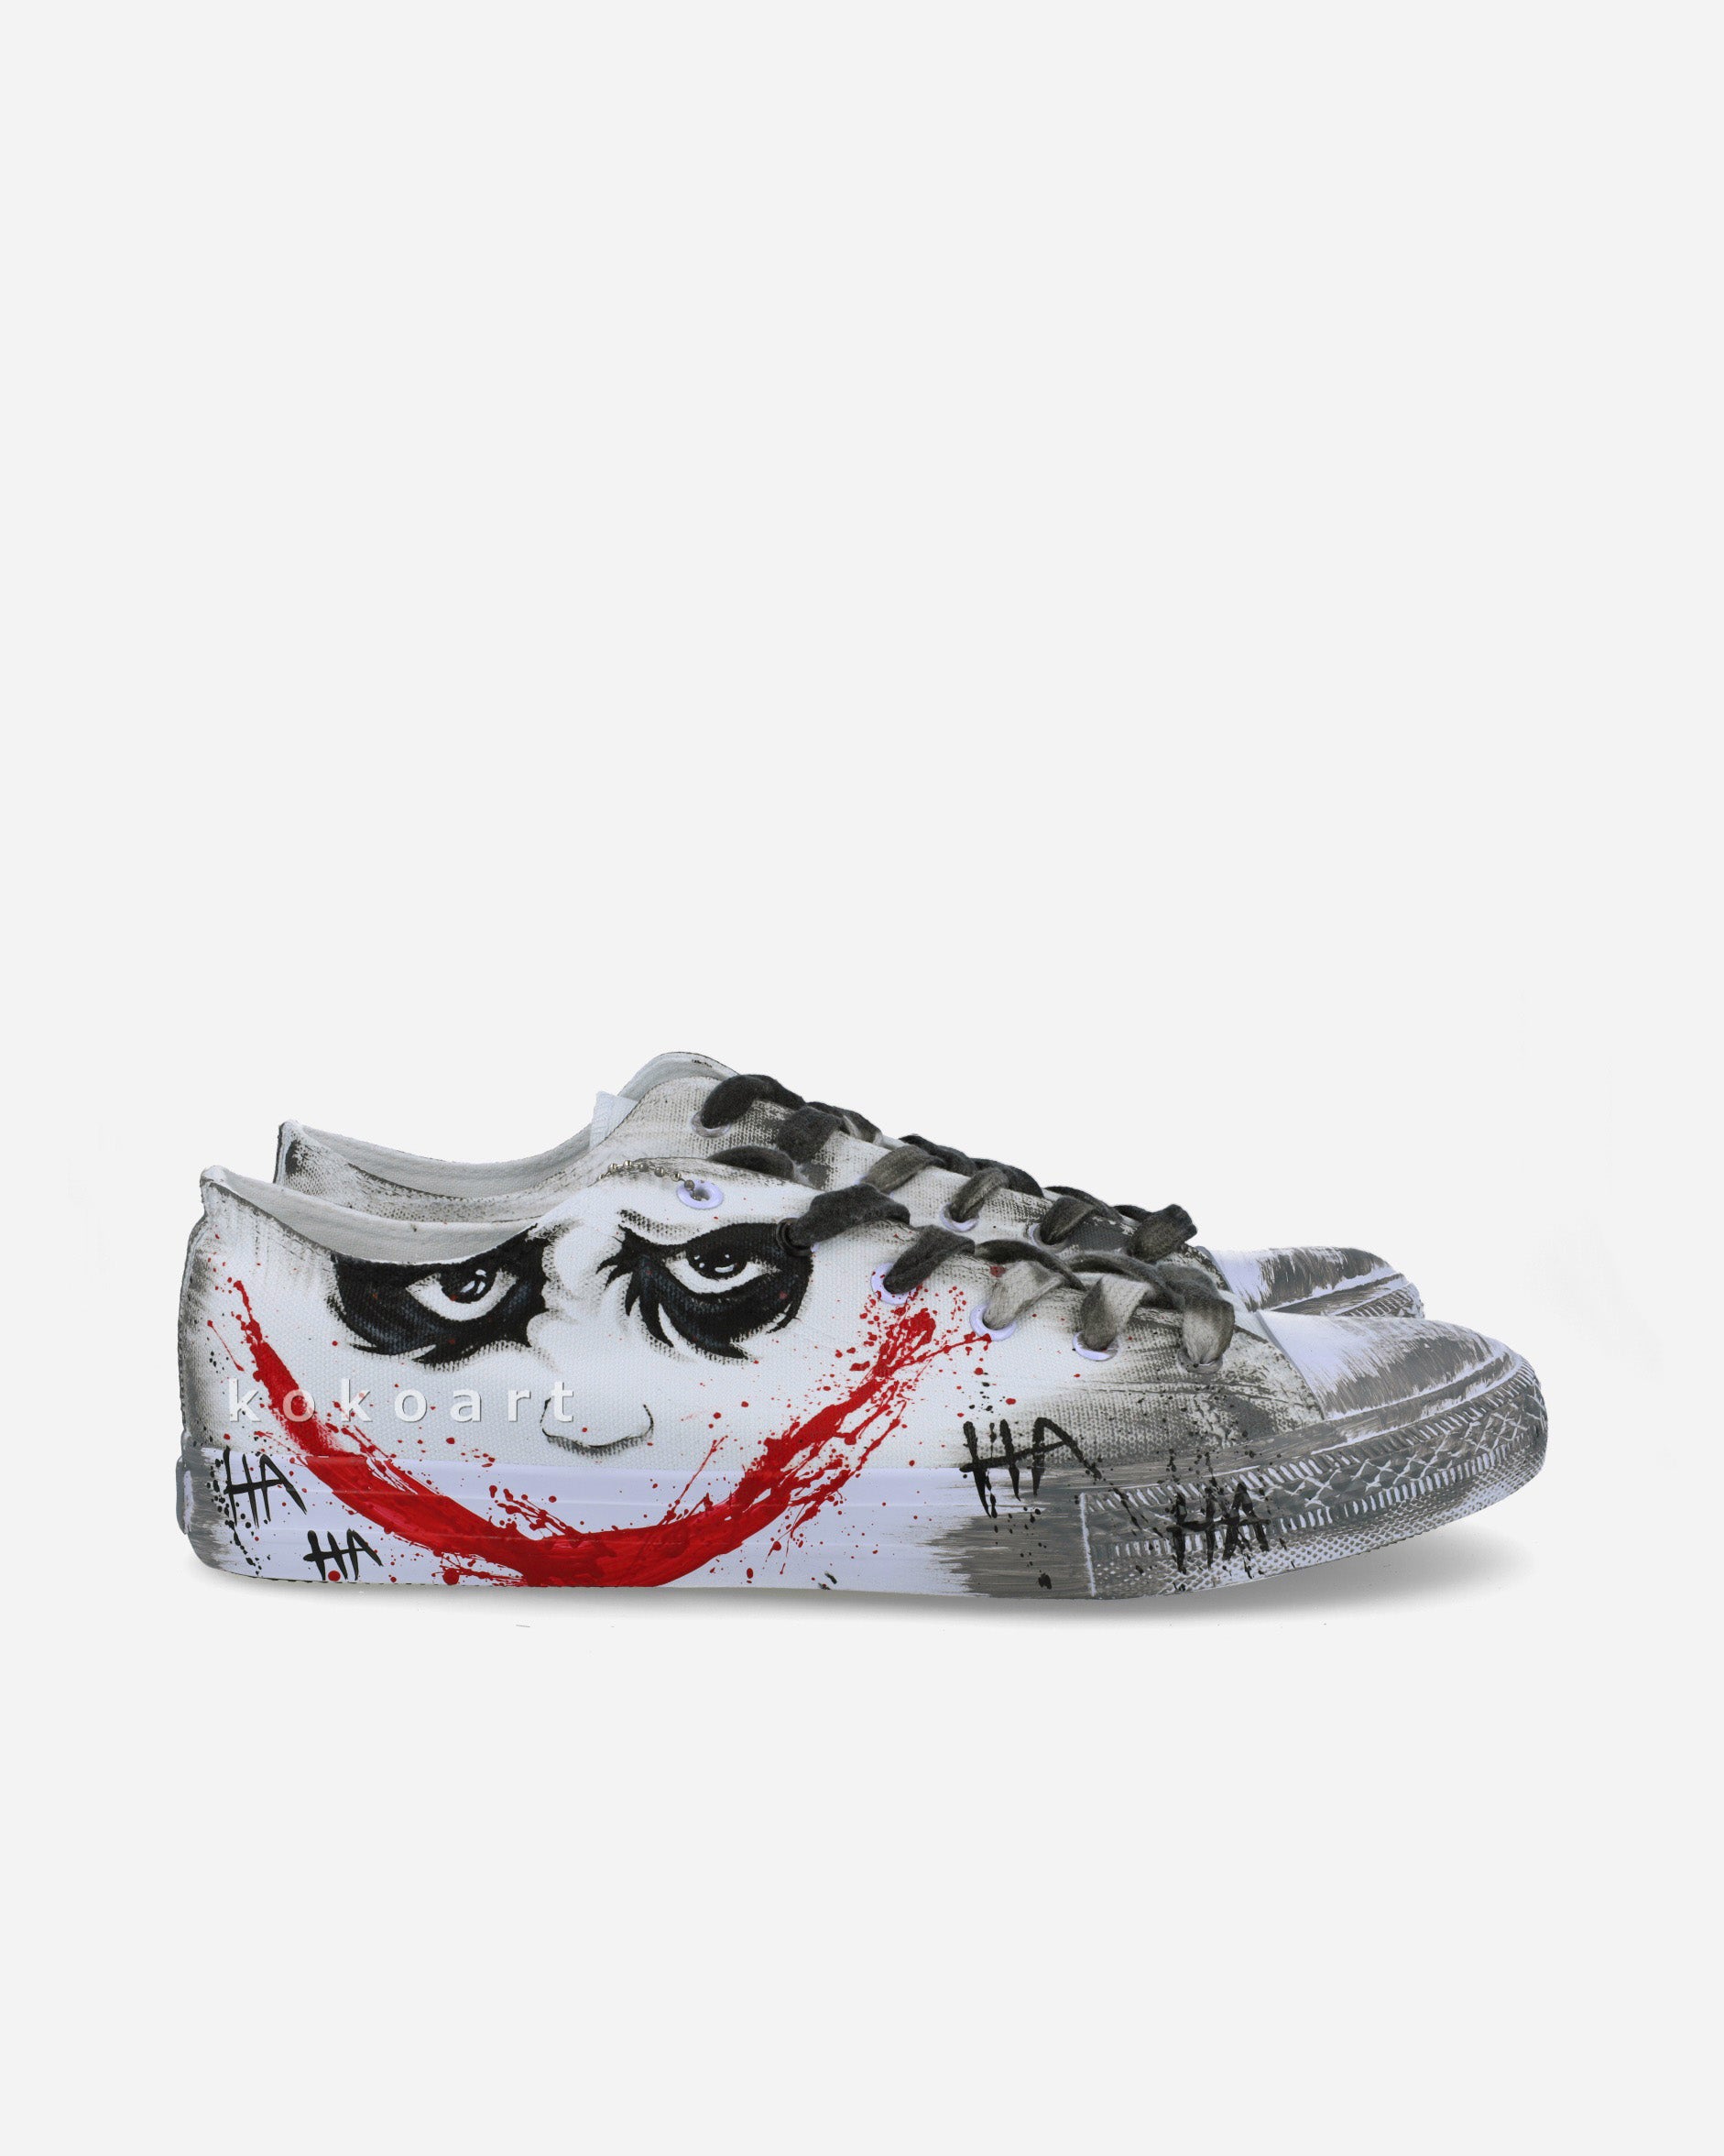 Joker Hand Painted Shoes